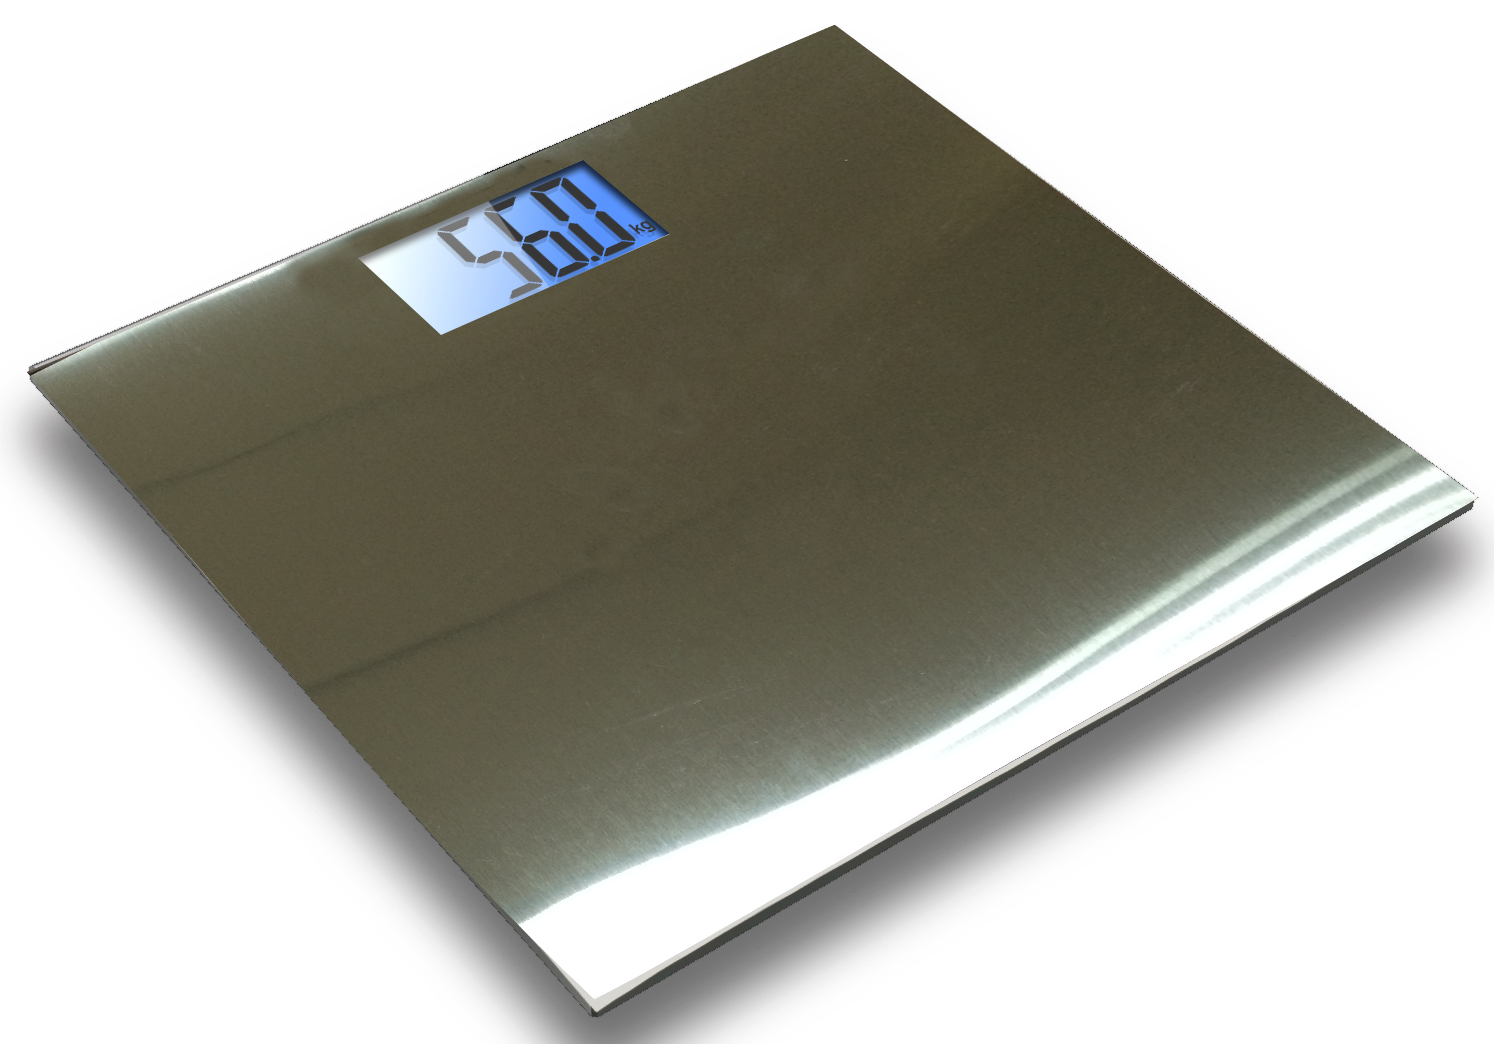 Stainless steel bathroom scale